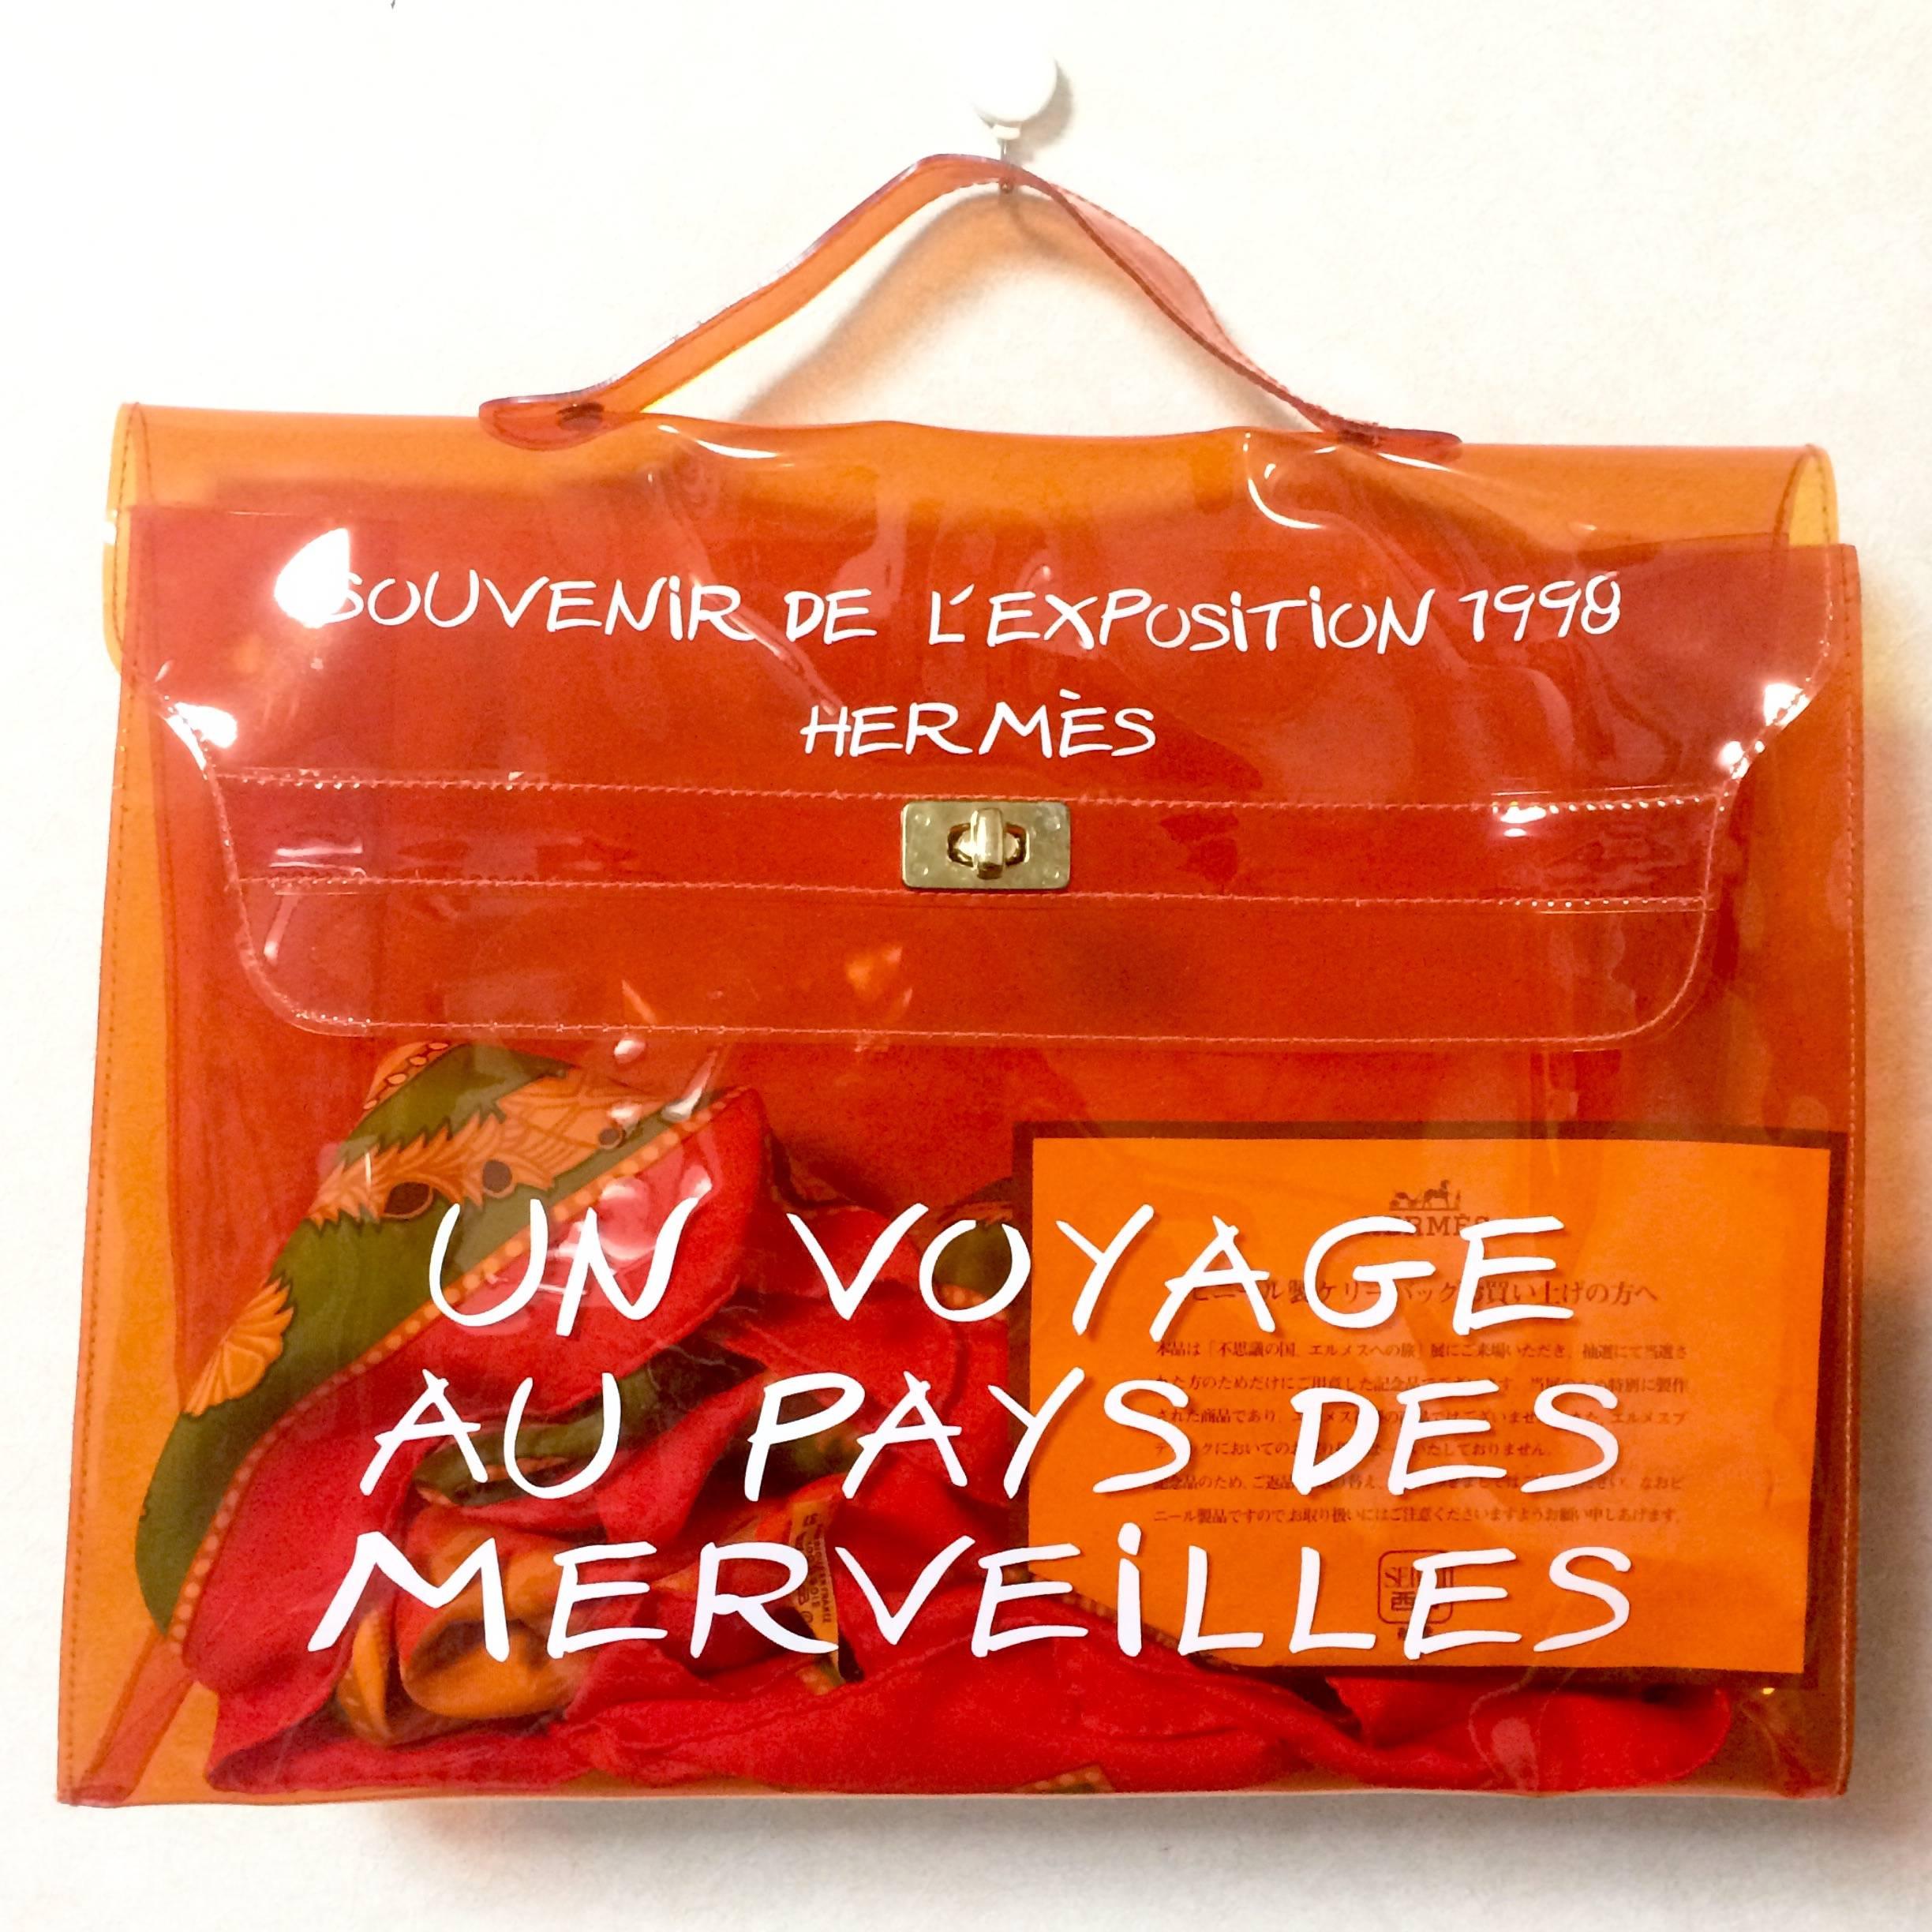 ***Scarf inside bag is for display purpose only***

**MINT condition. Hermes a rare transparent Vintage orange vinyl Kelly bag Japan Limited Edition, Japan Department Store.

SPECIAL piece for Hermes vintage collector or lover! 
Don't miss!!

This